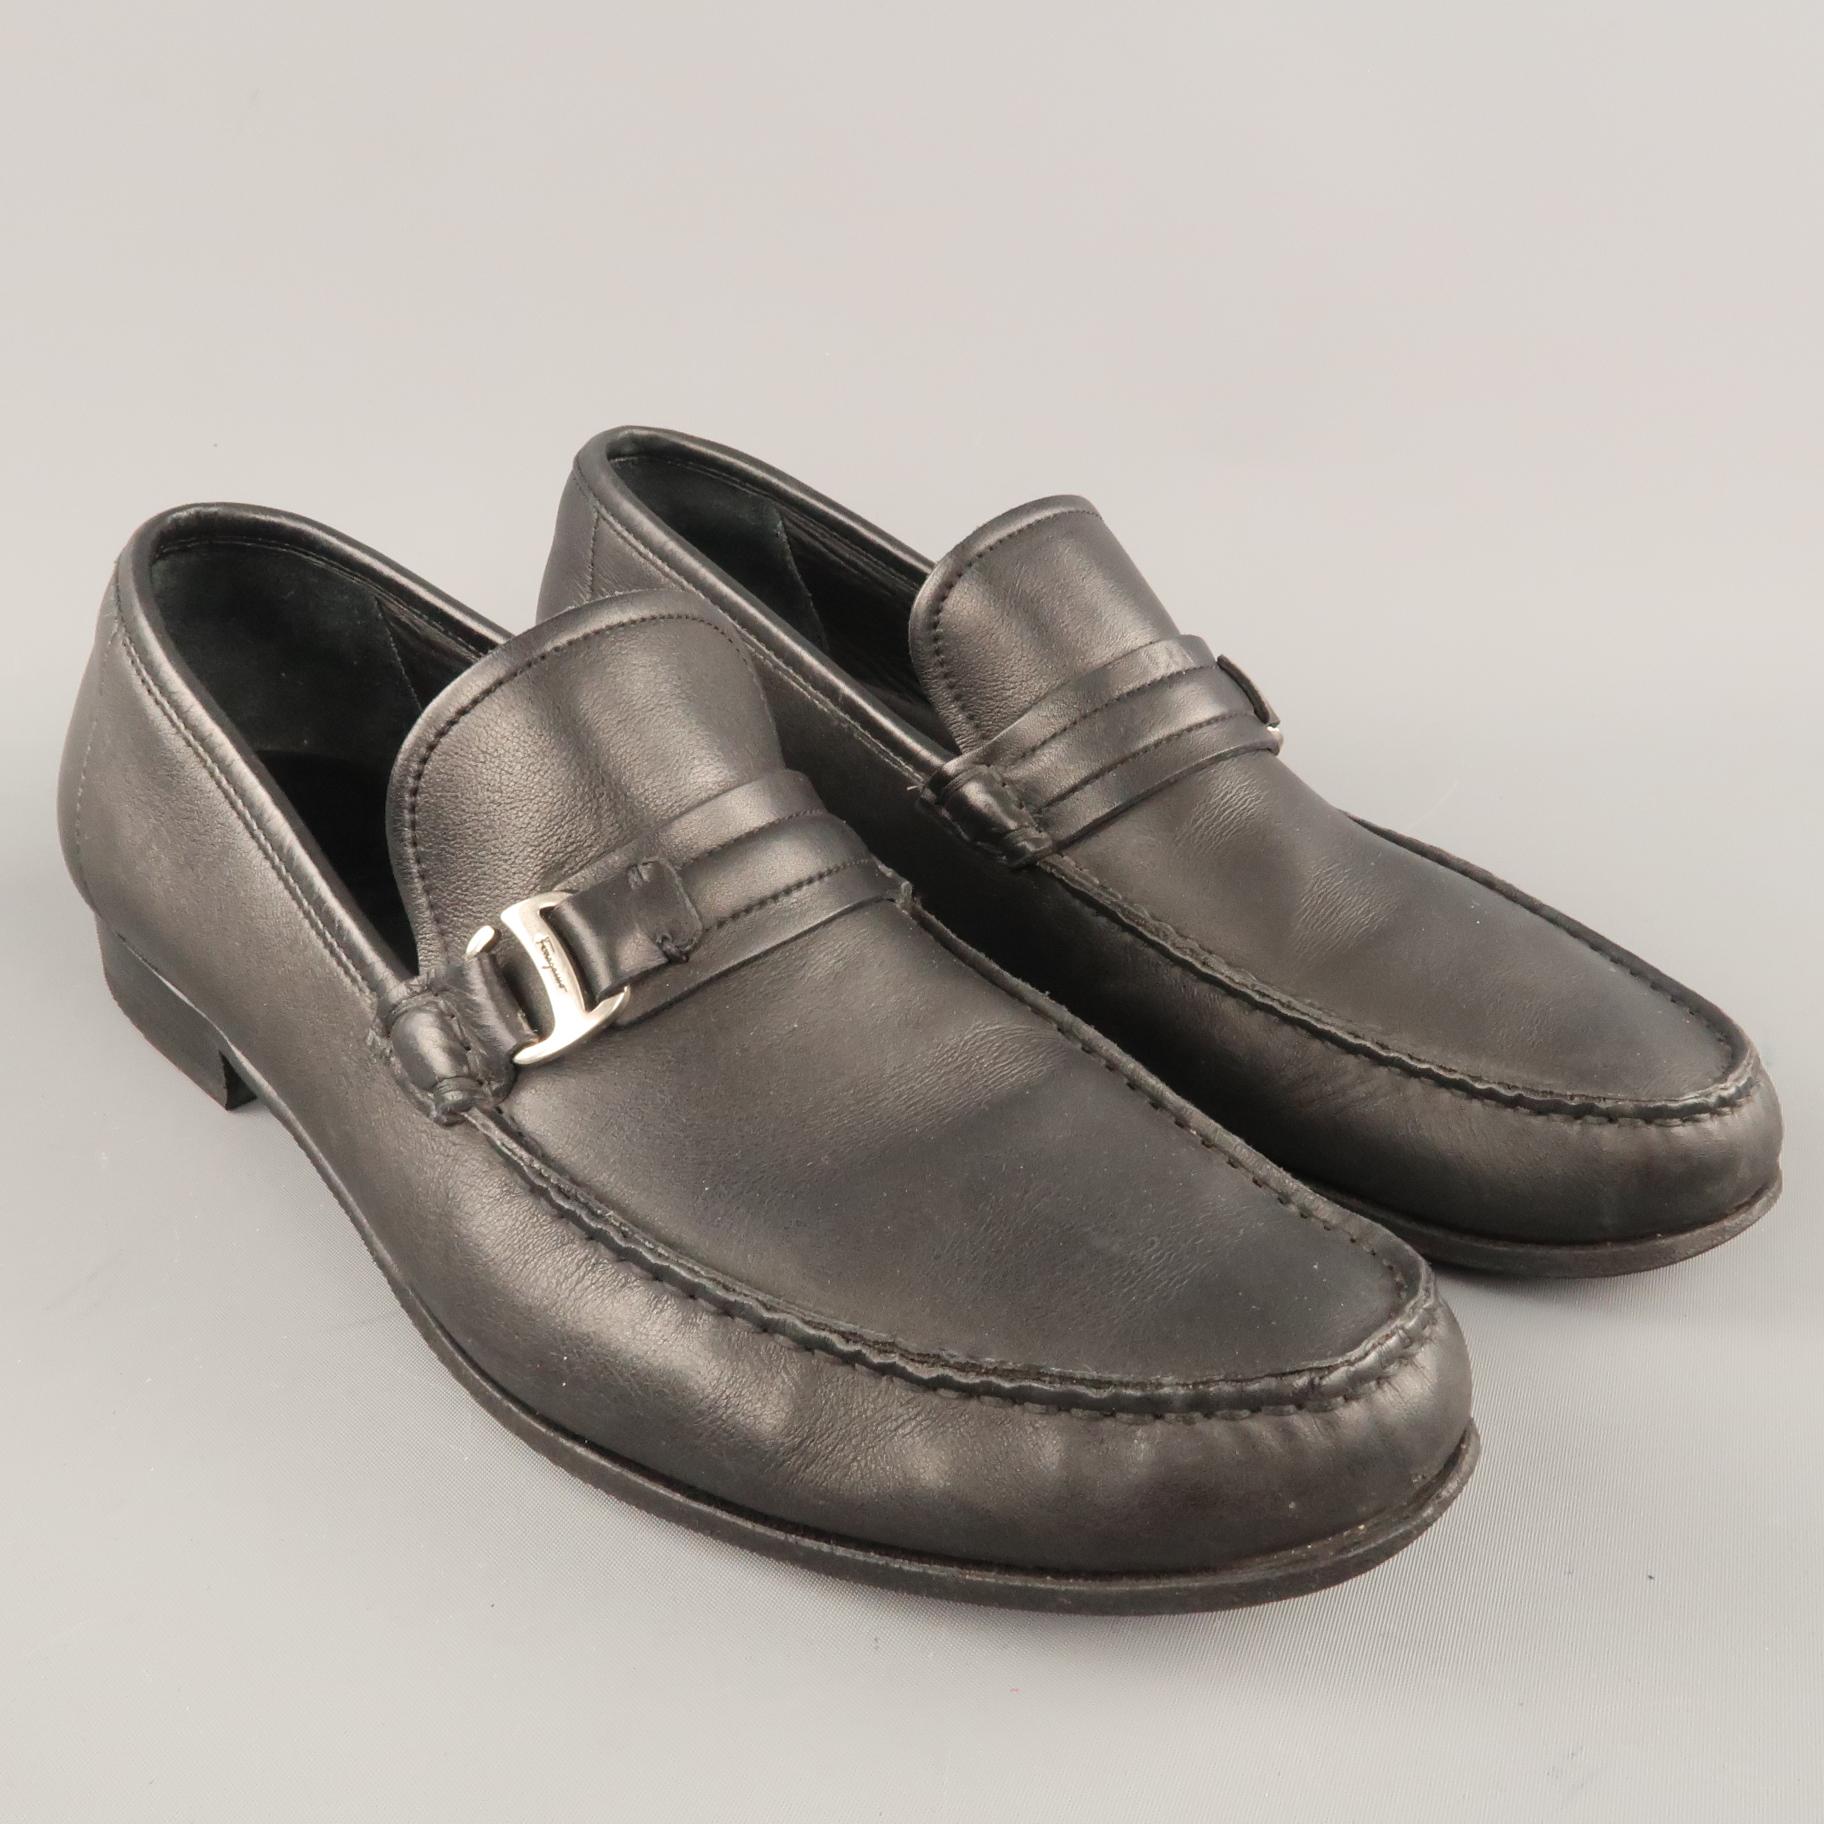 SALVATORE FERRAGAMO loafers come in smooth leather with an apron toe detailed with a leather buckle strap. Made in Italy.
 
Very Good Pre-Owned Condition.
Marked: 9 1/2
 
Outsole: 11.5 x 3.5 in.